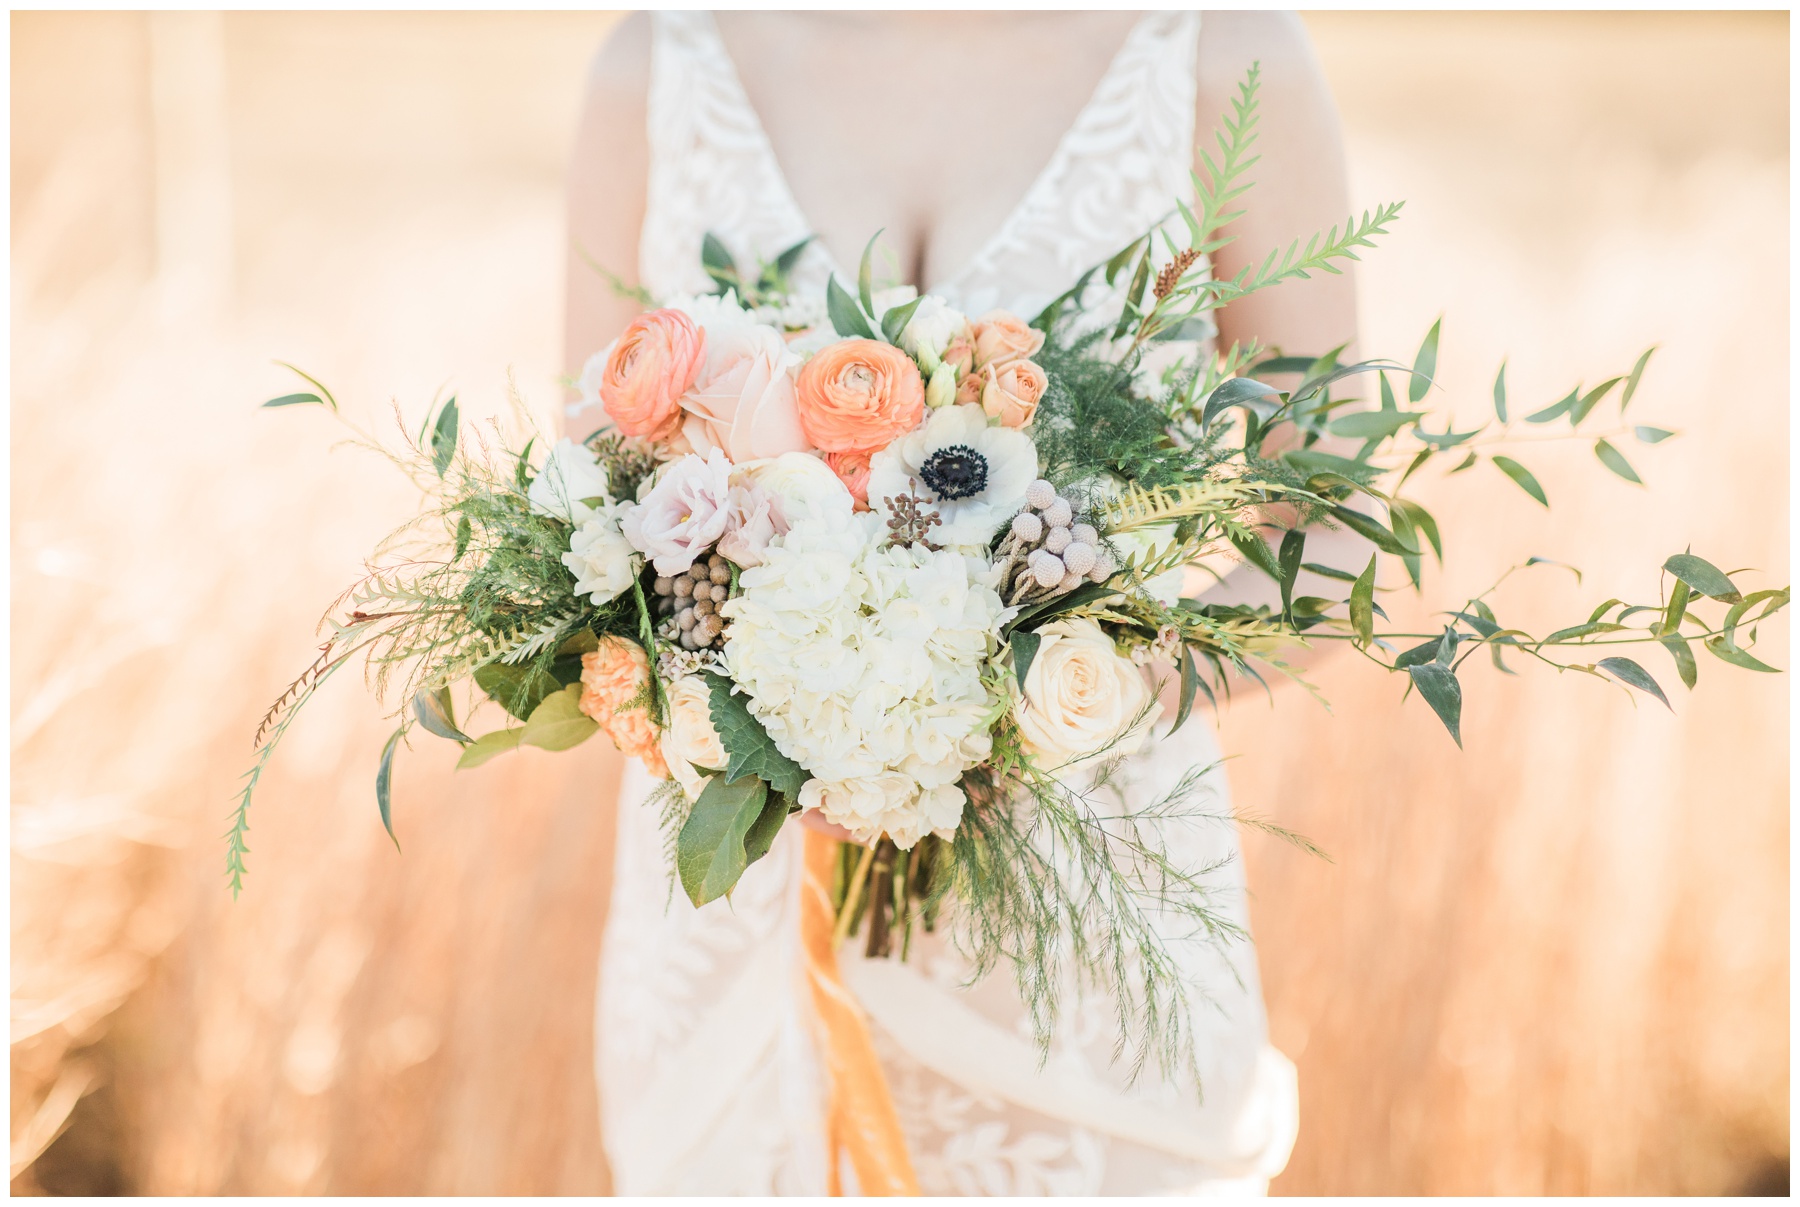 Bridal bouquet filled with cream roses, peach ranunculus, and anemones by Analicia's Flower Shop